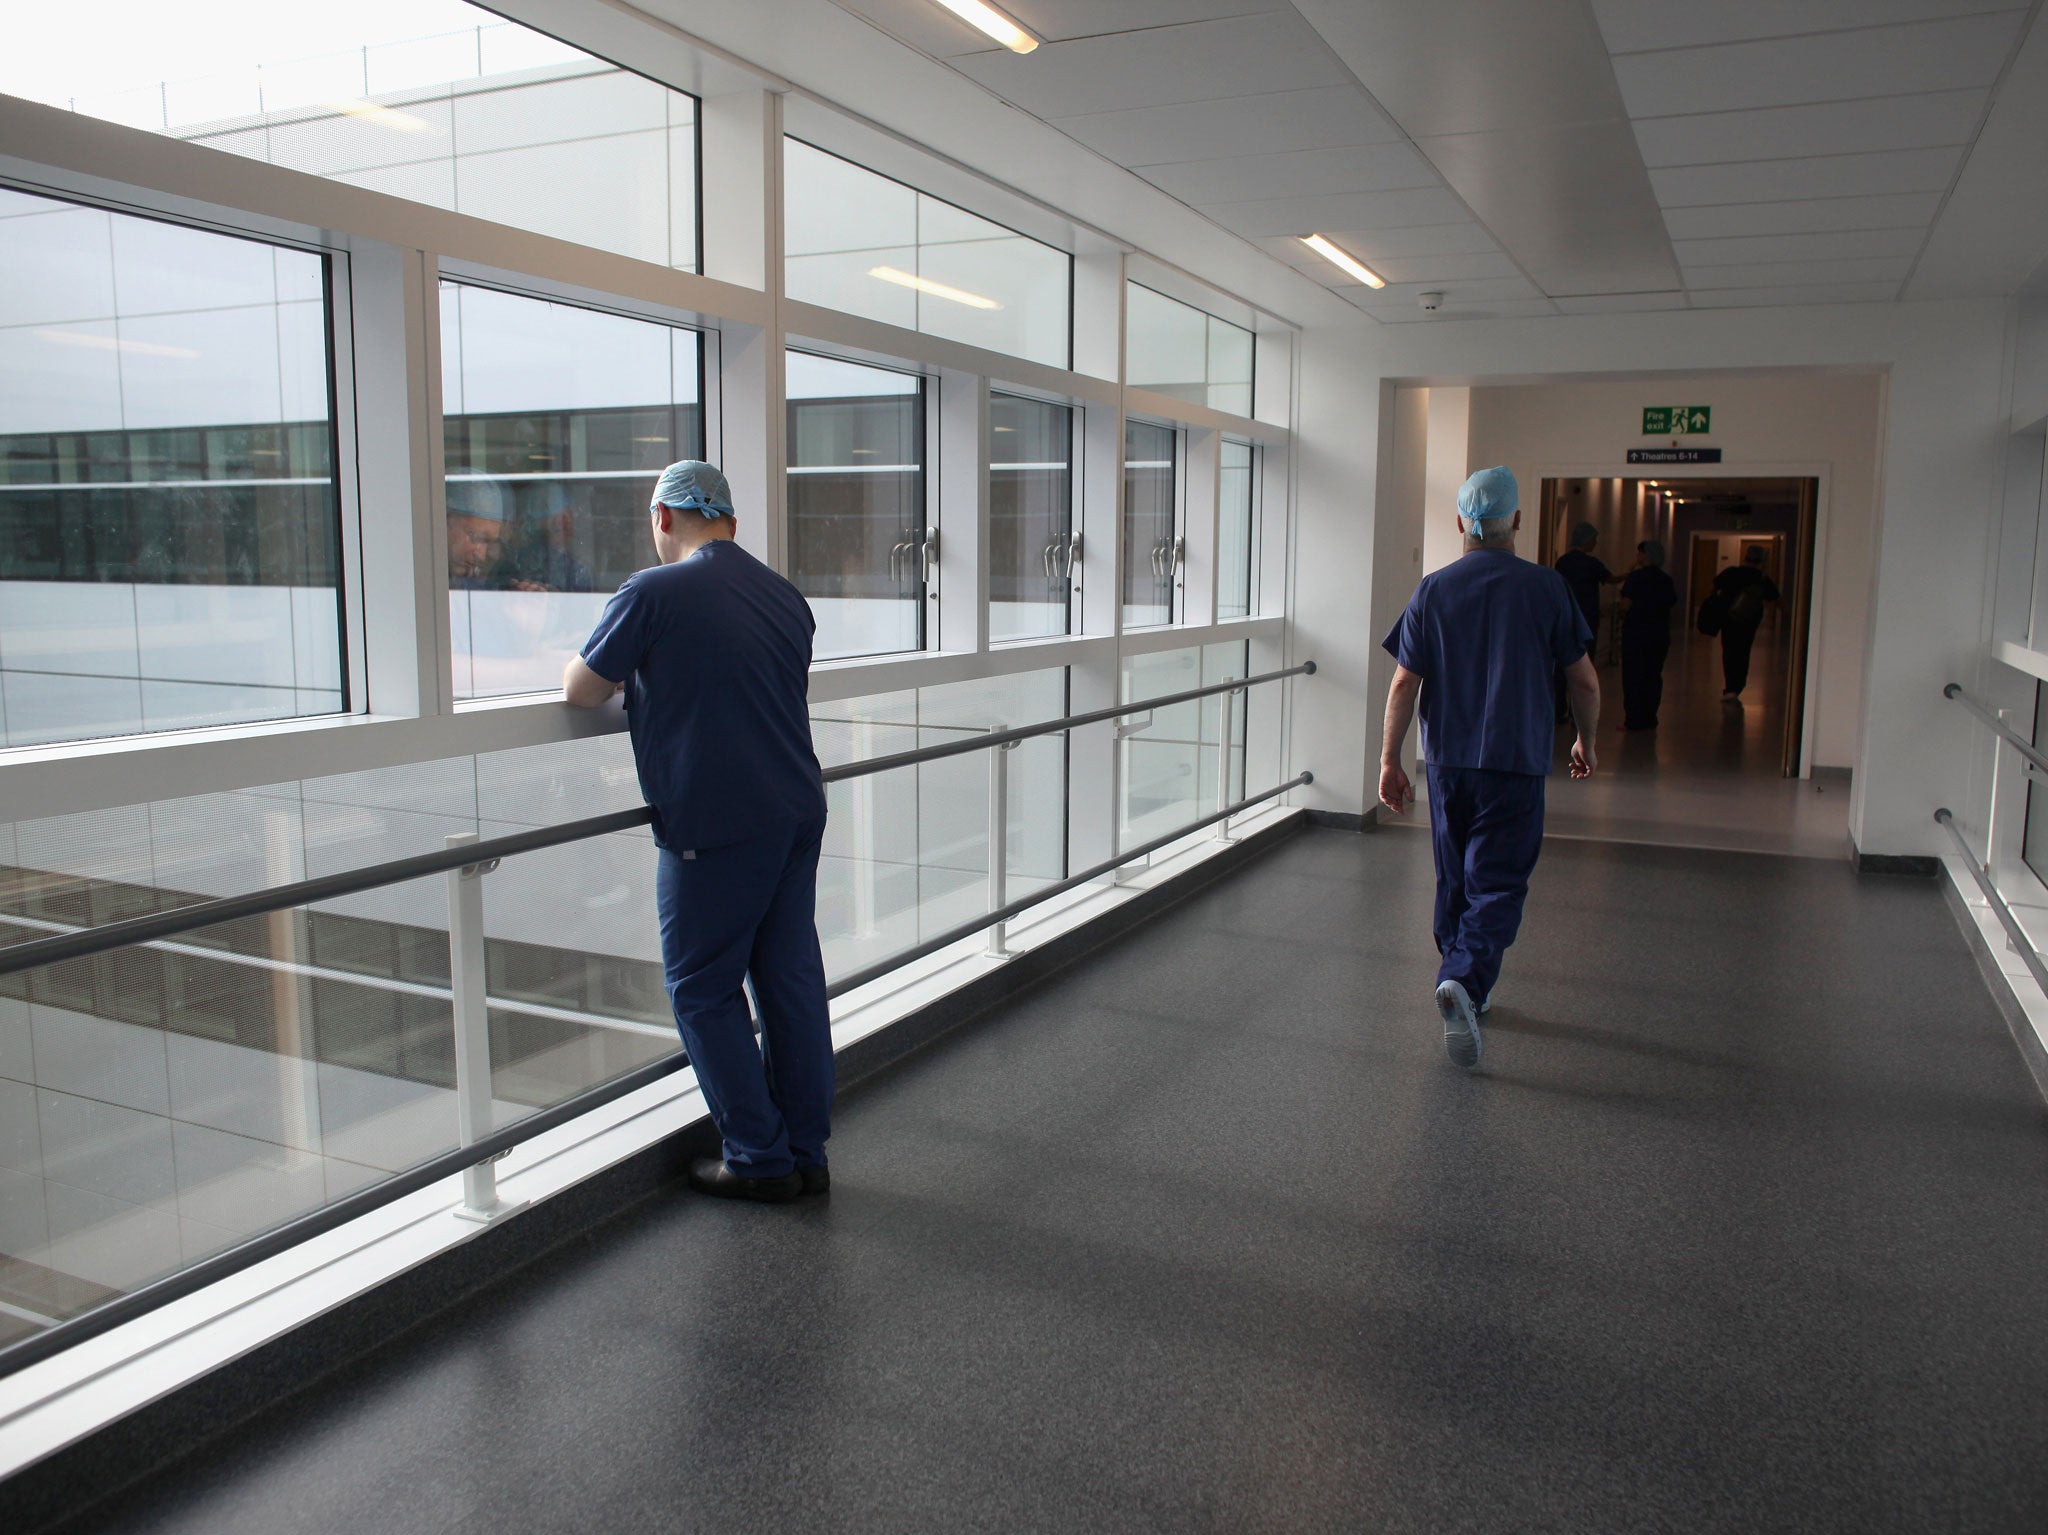 Operating theatre staff walk along a corridor in Birmingham Queen Elizabeth Hospital where Ahmed will be treated